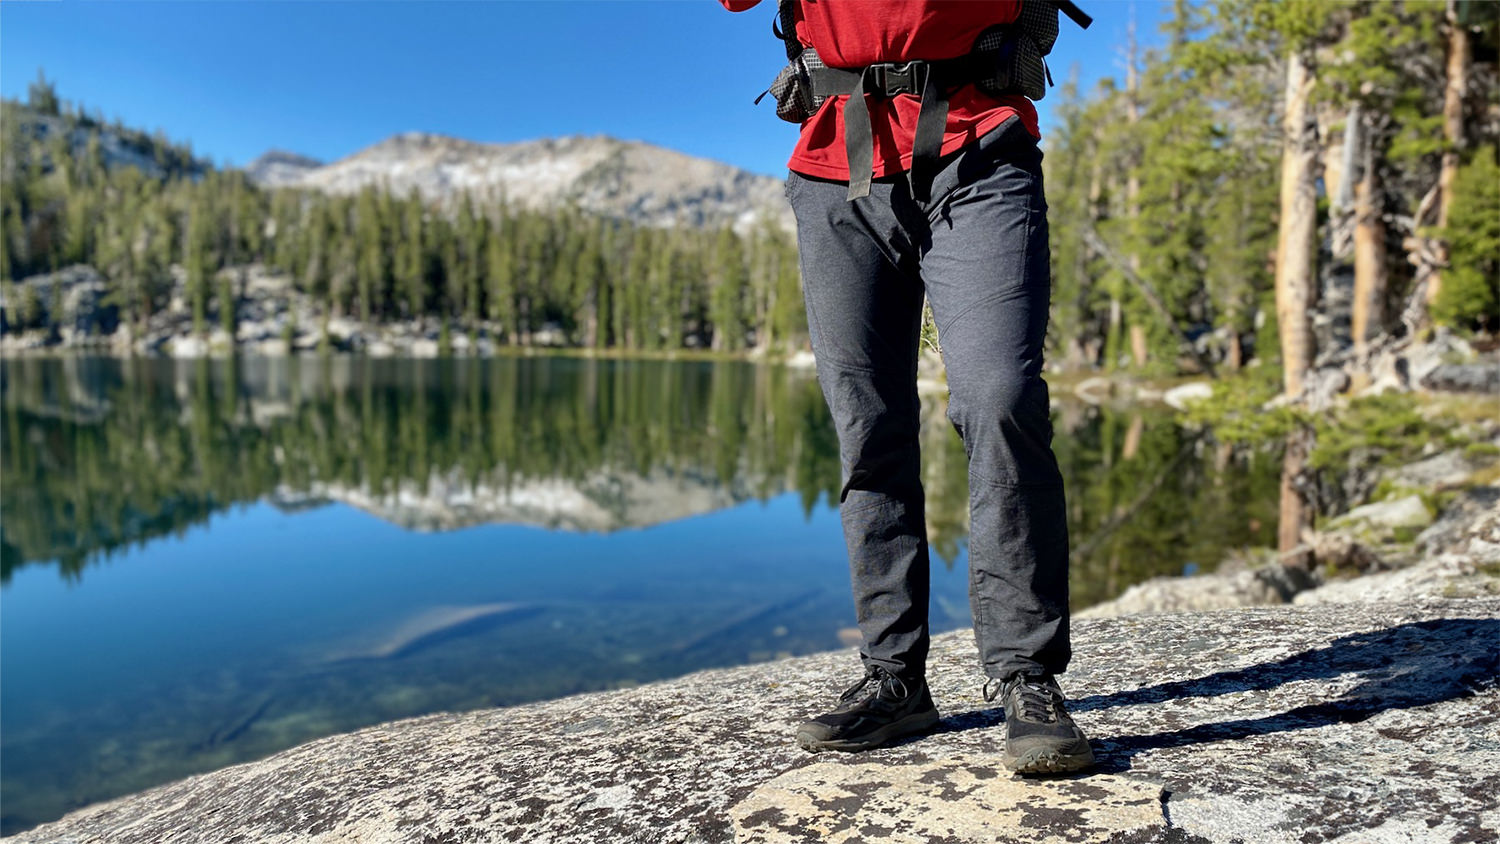 These Kuhl Hiking Pants Are on Sale at Backcountry